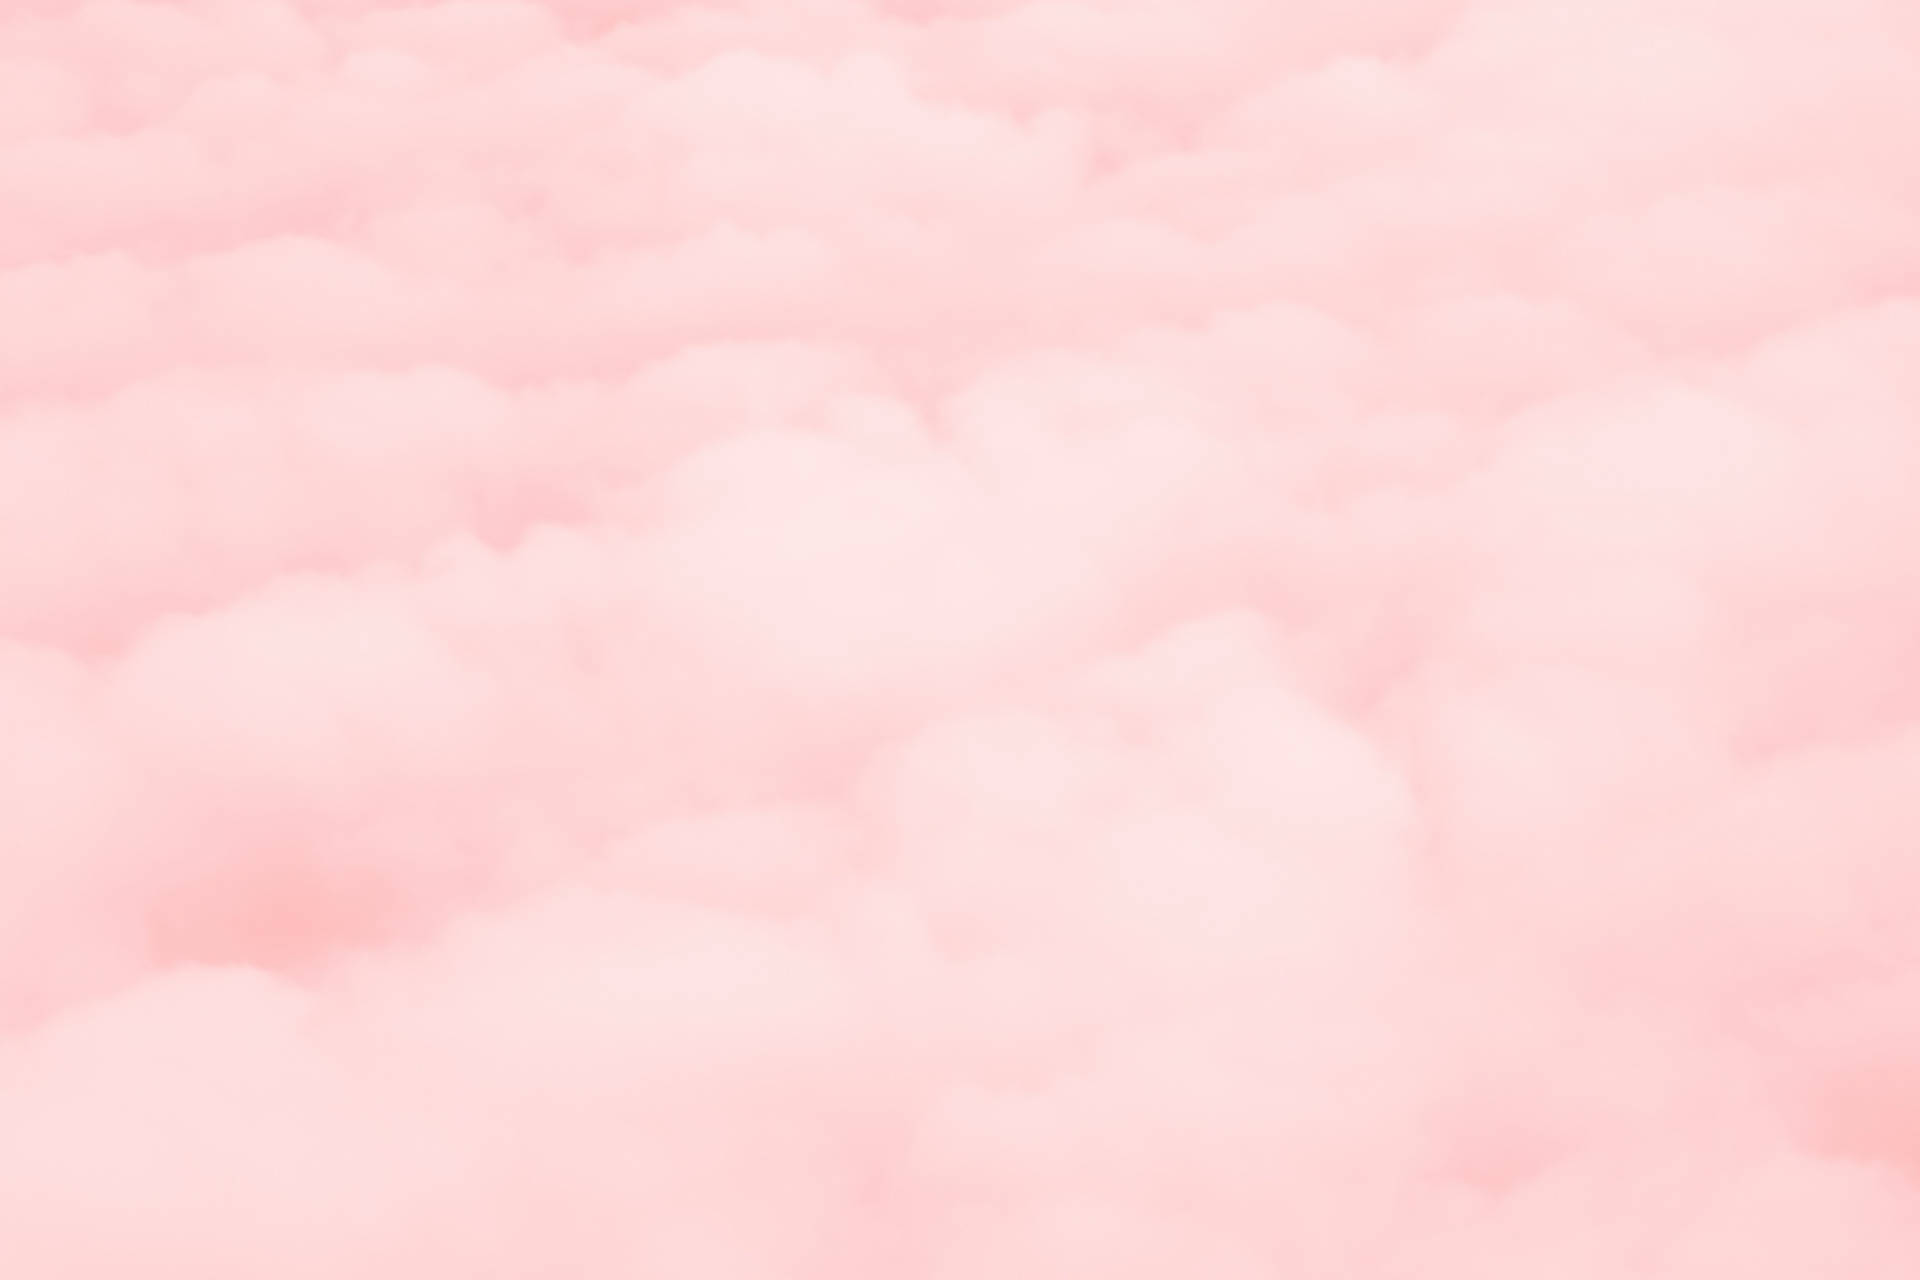 Cute Pastel Aesthetic Pink Cotton Clouds Background